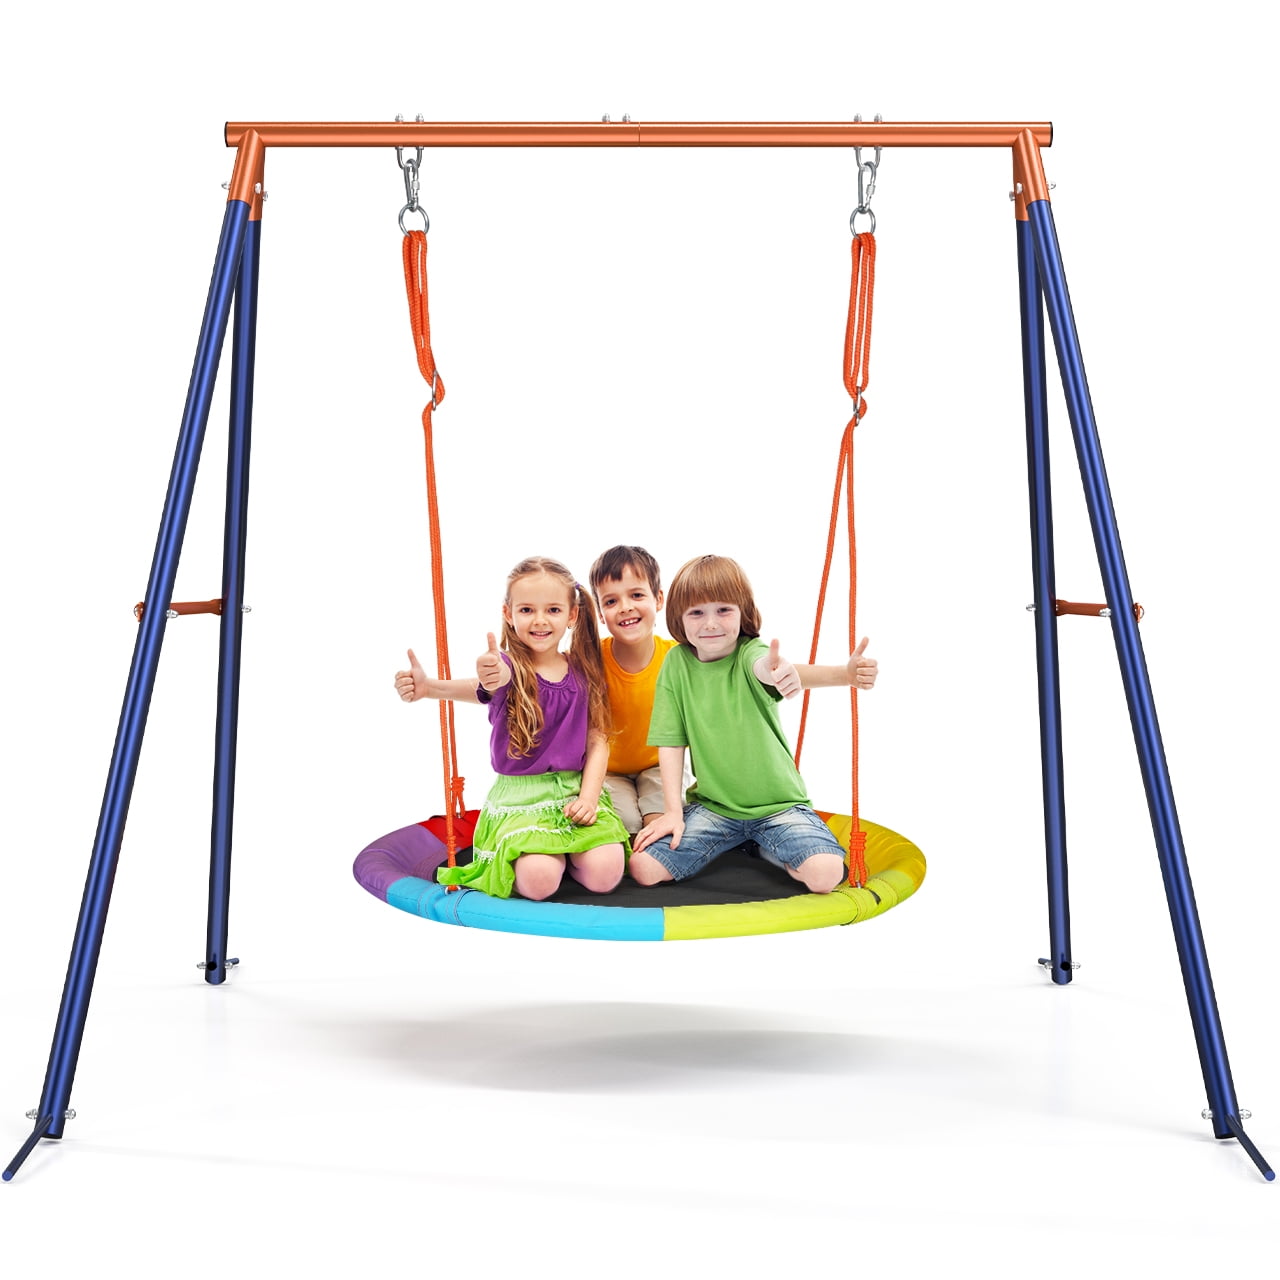 Sturdy Child Swing Seat Outdoor Fun Activity Weather-Resistant Rope Steel Frame 